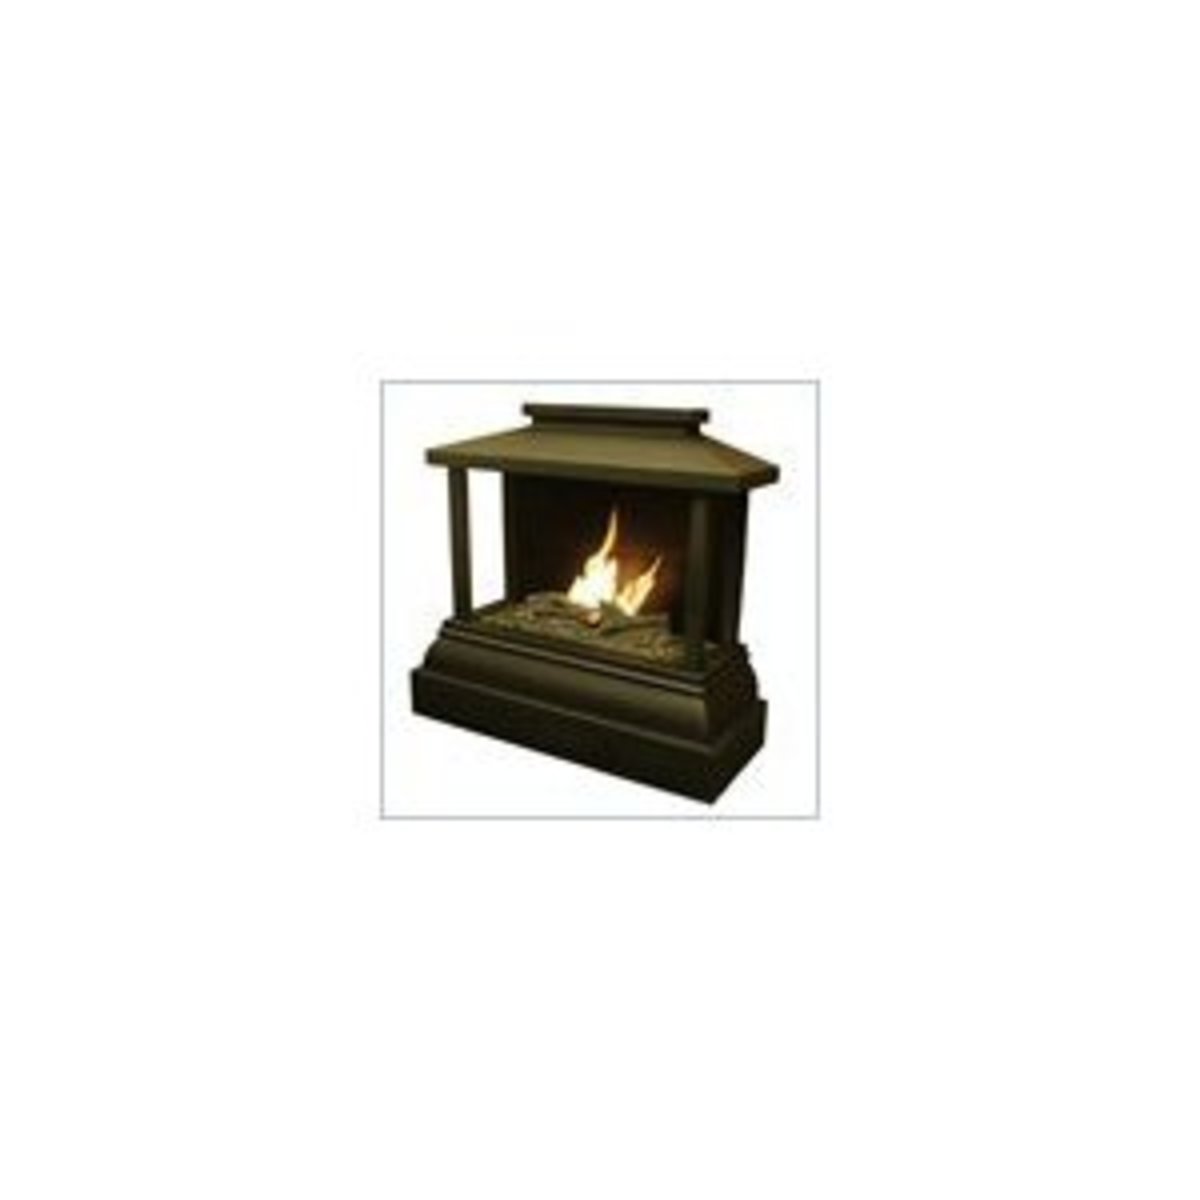 Find a great outdoor fireplace online!